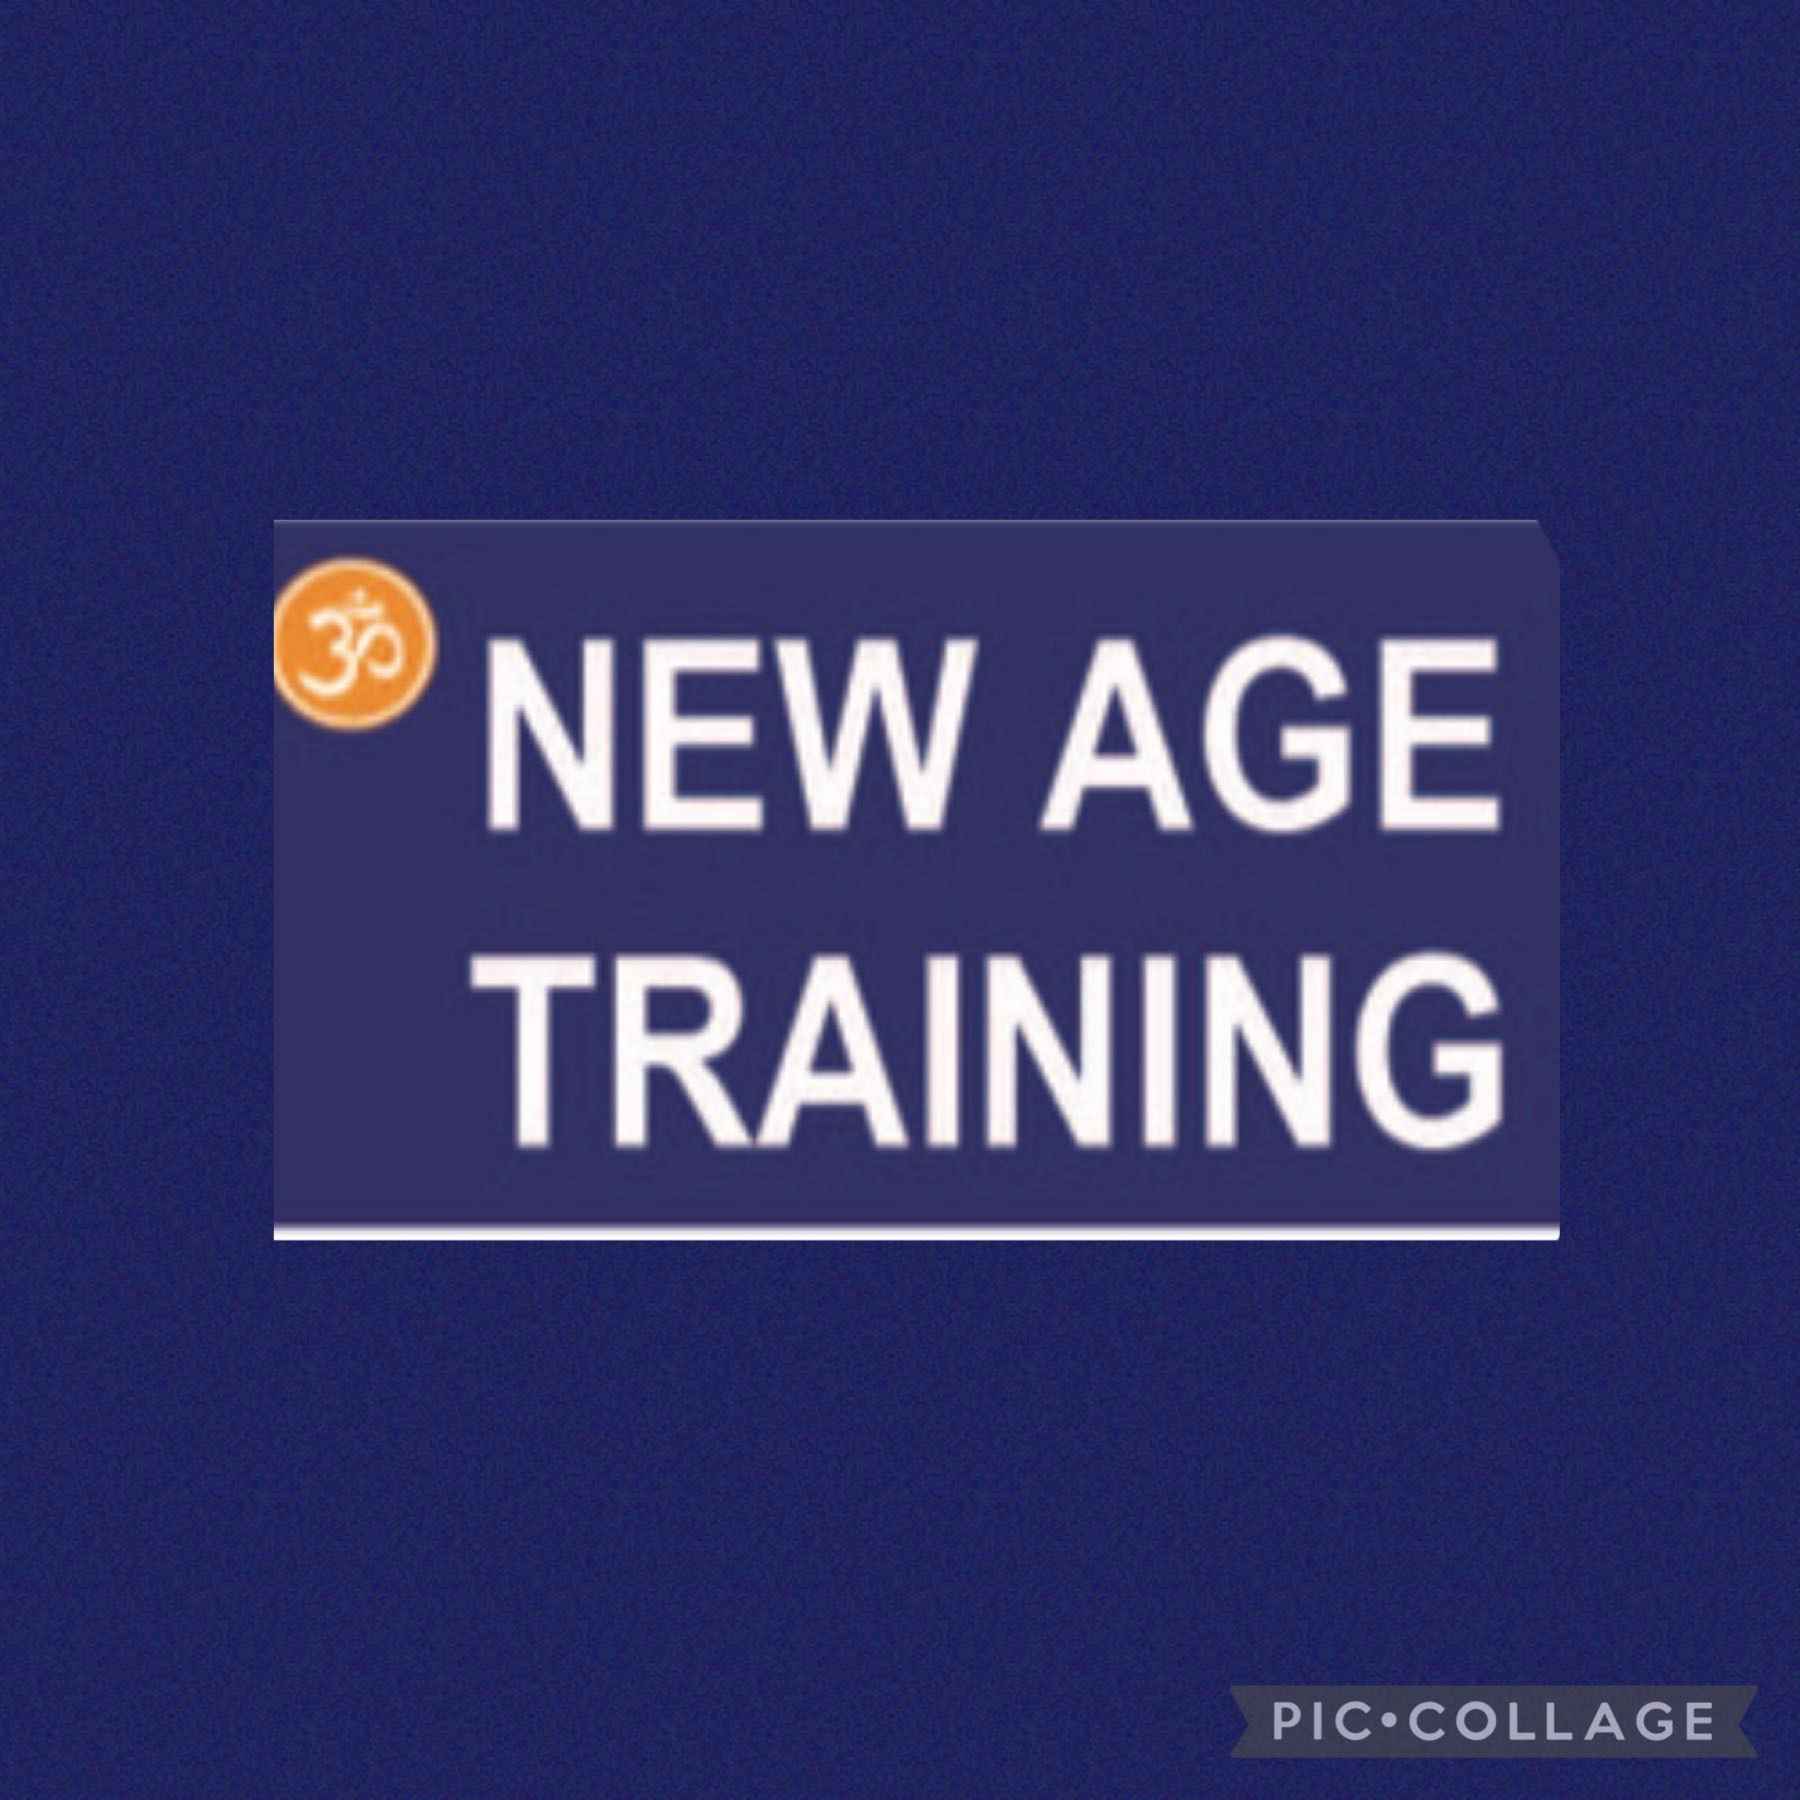 New Age Professionals Training Academy